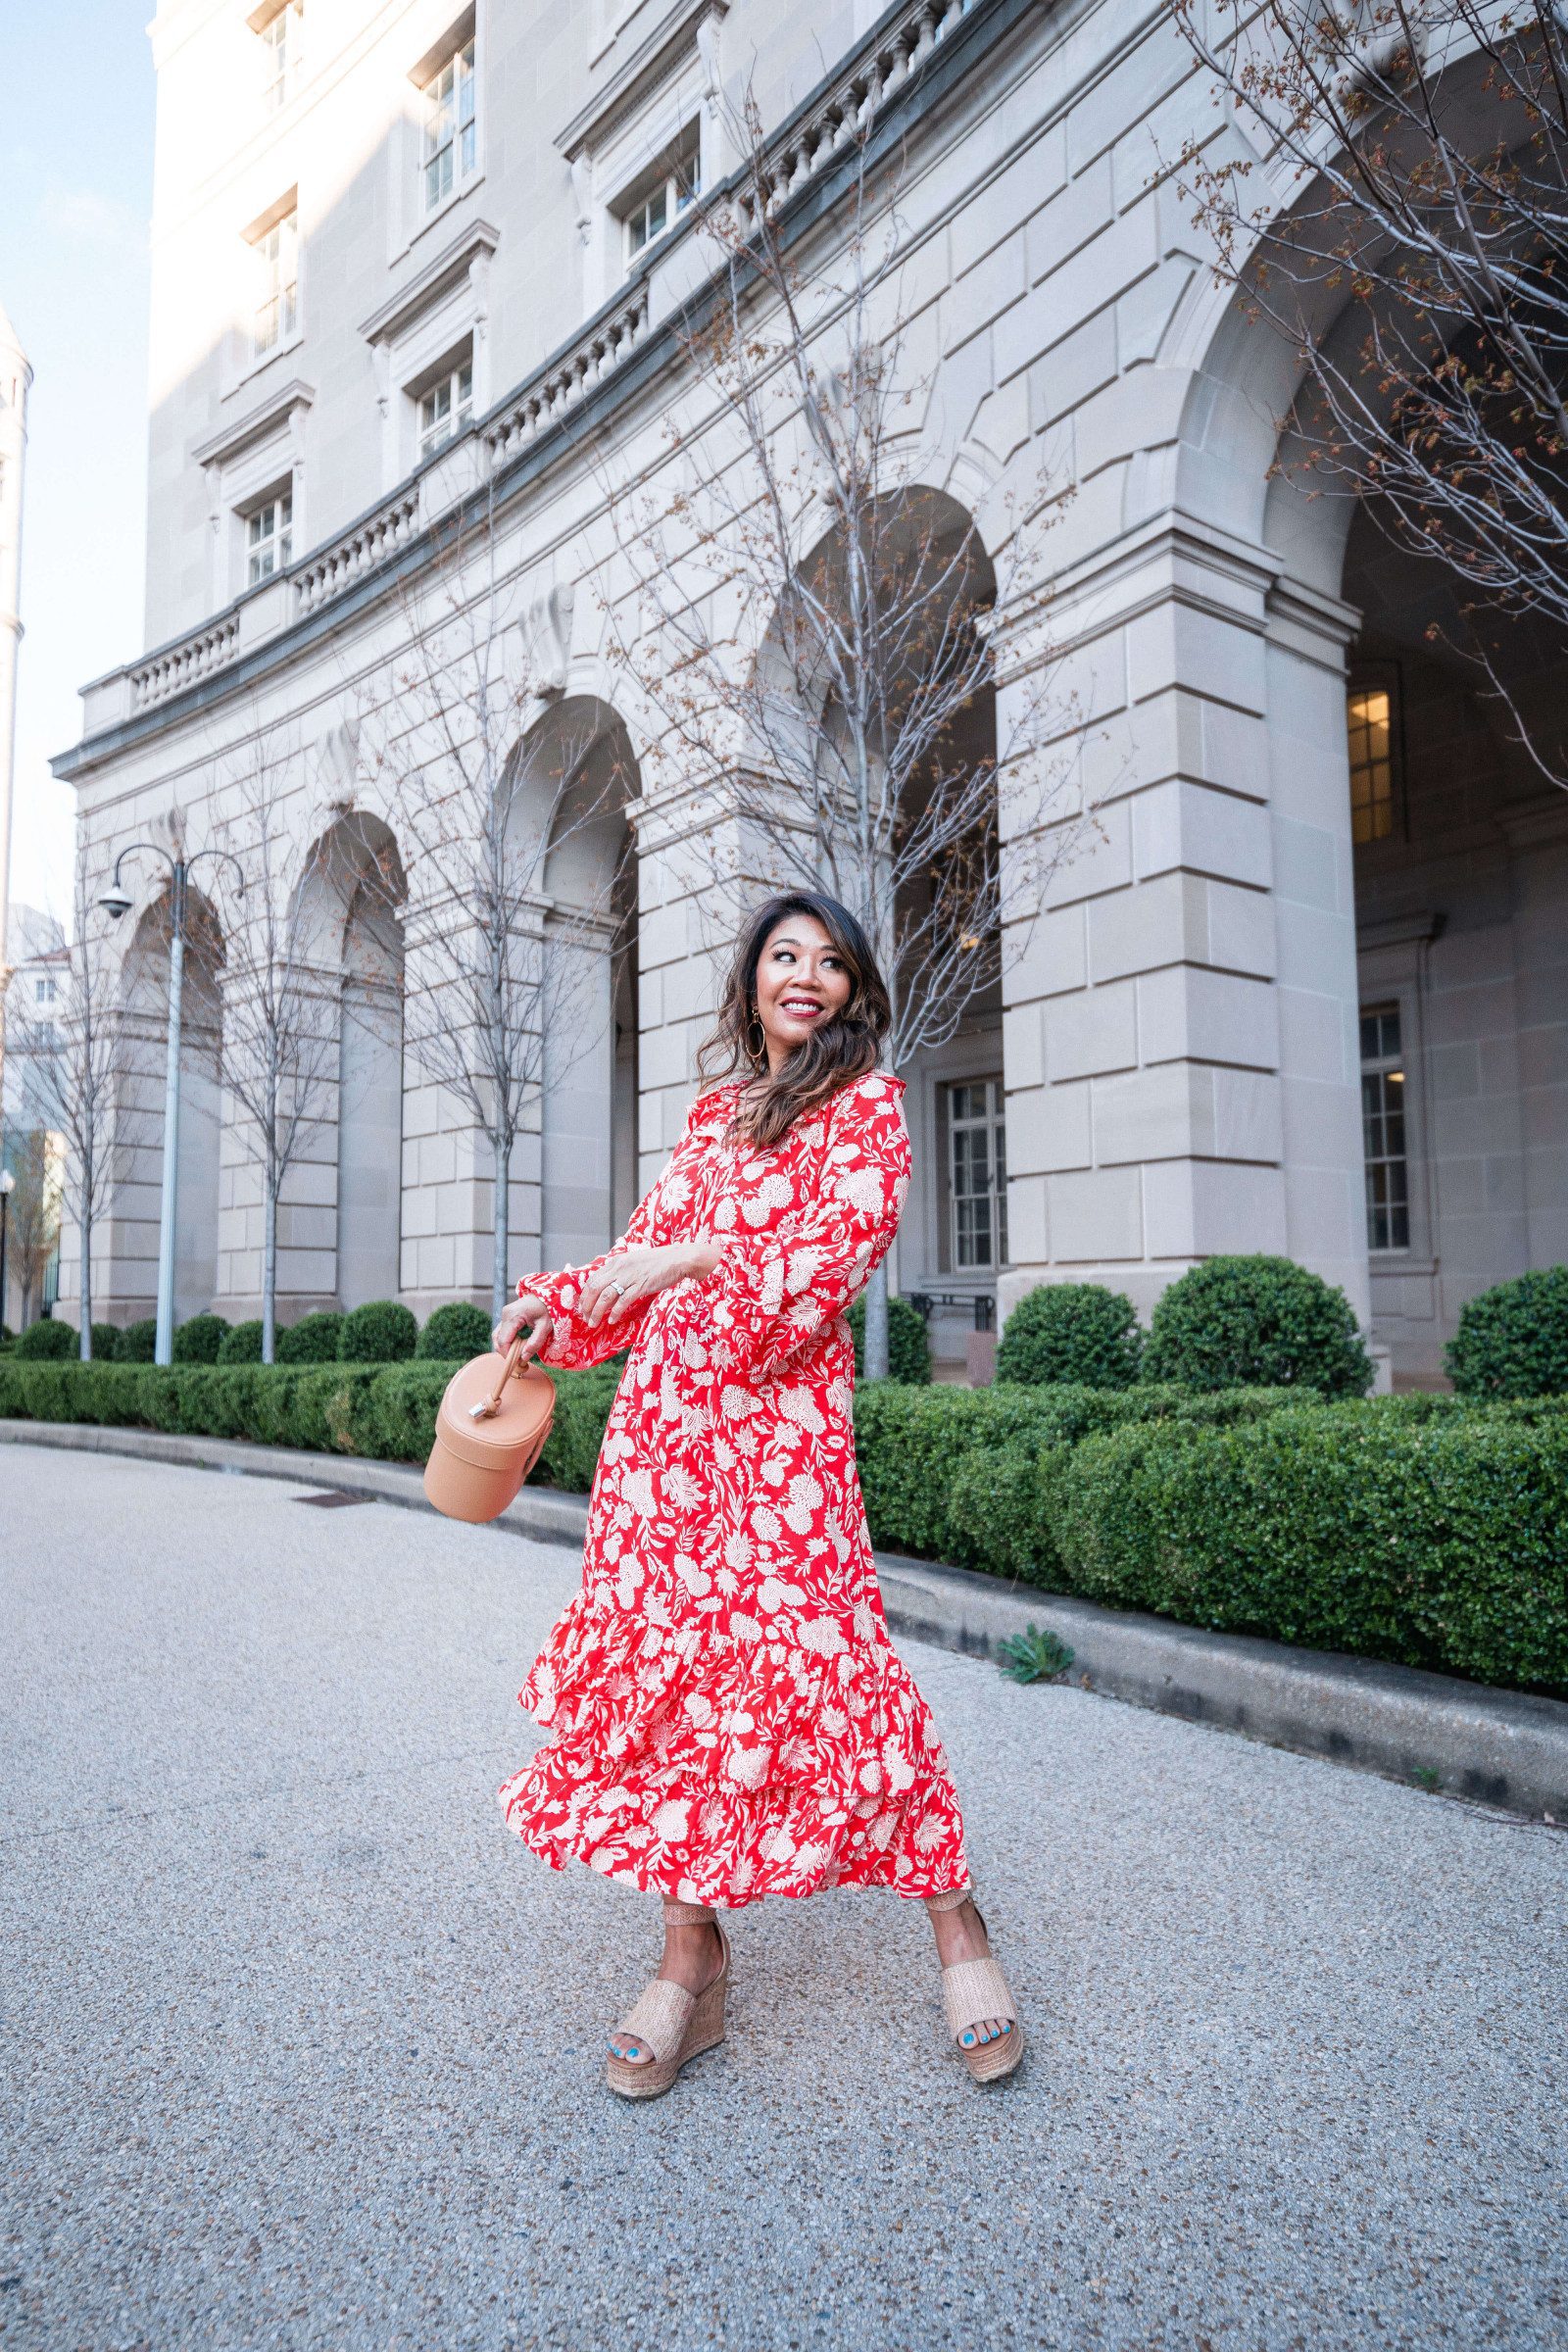 Predupre wearing a floral maxi dress with wedges